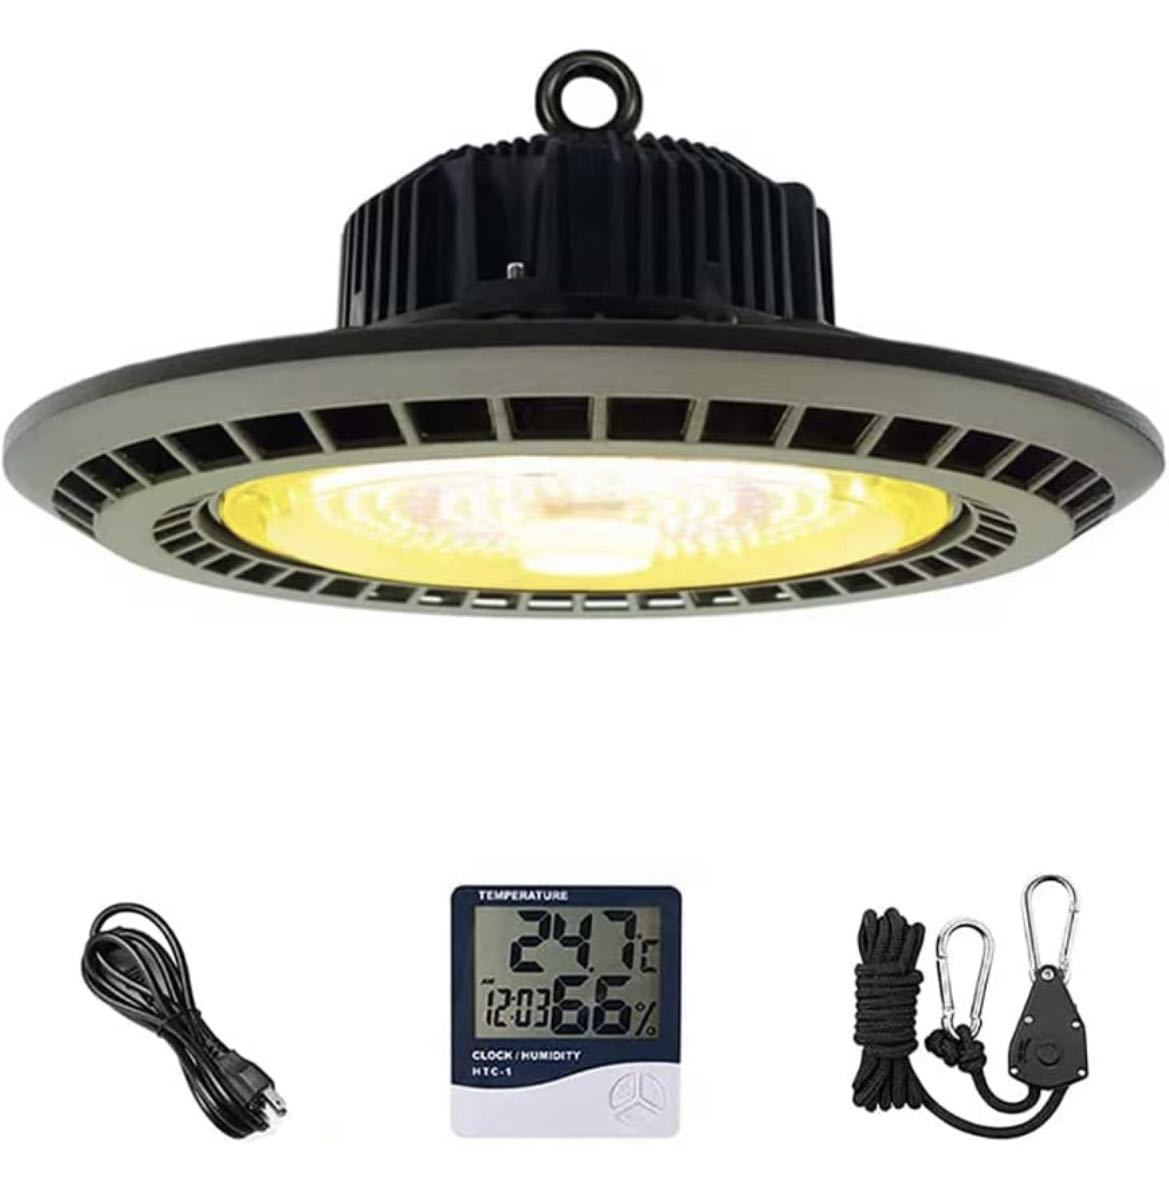  free shipping! new goods unused plant rearing light 1000W LED light compound light 